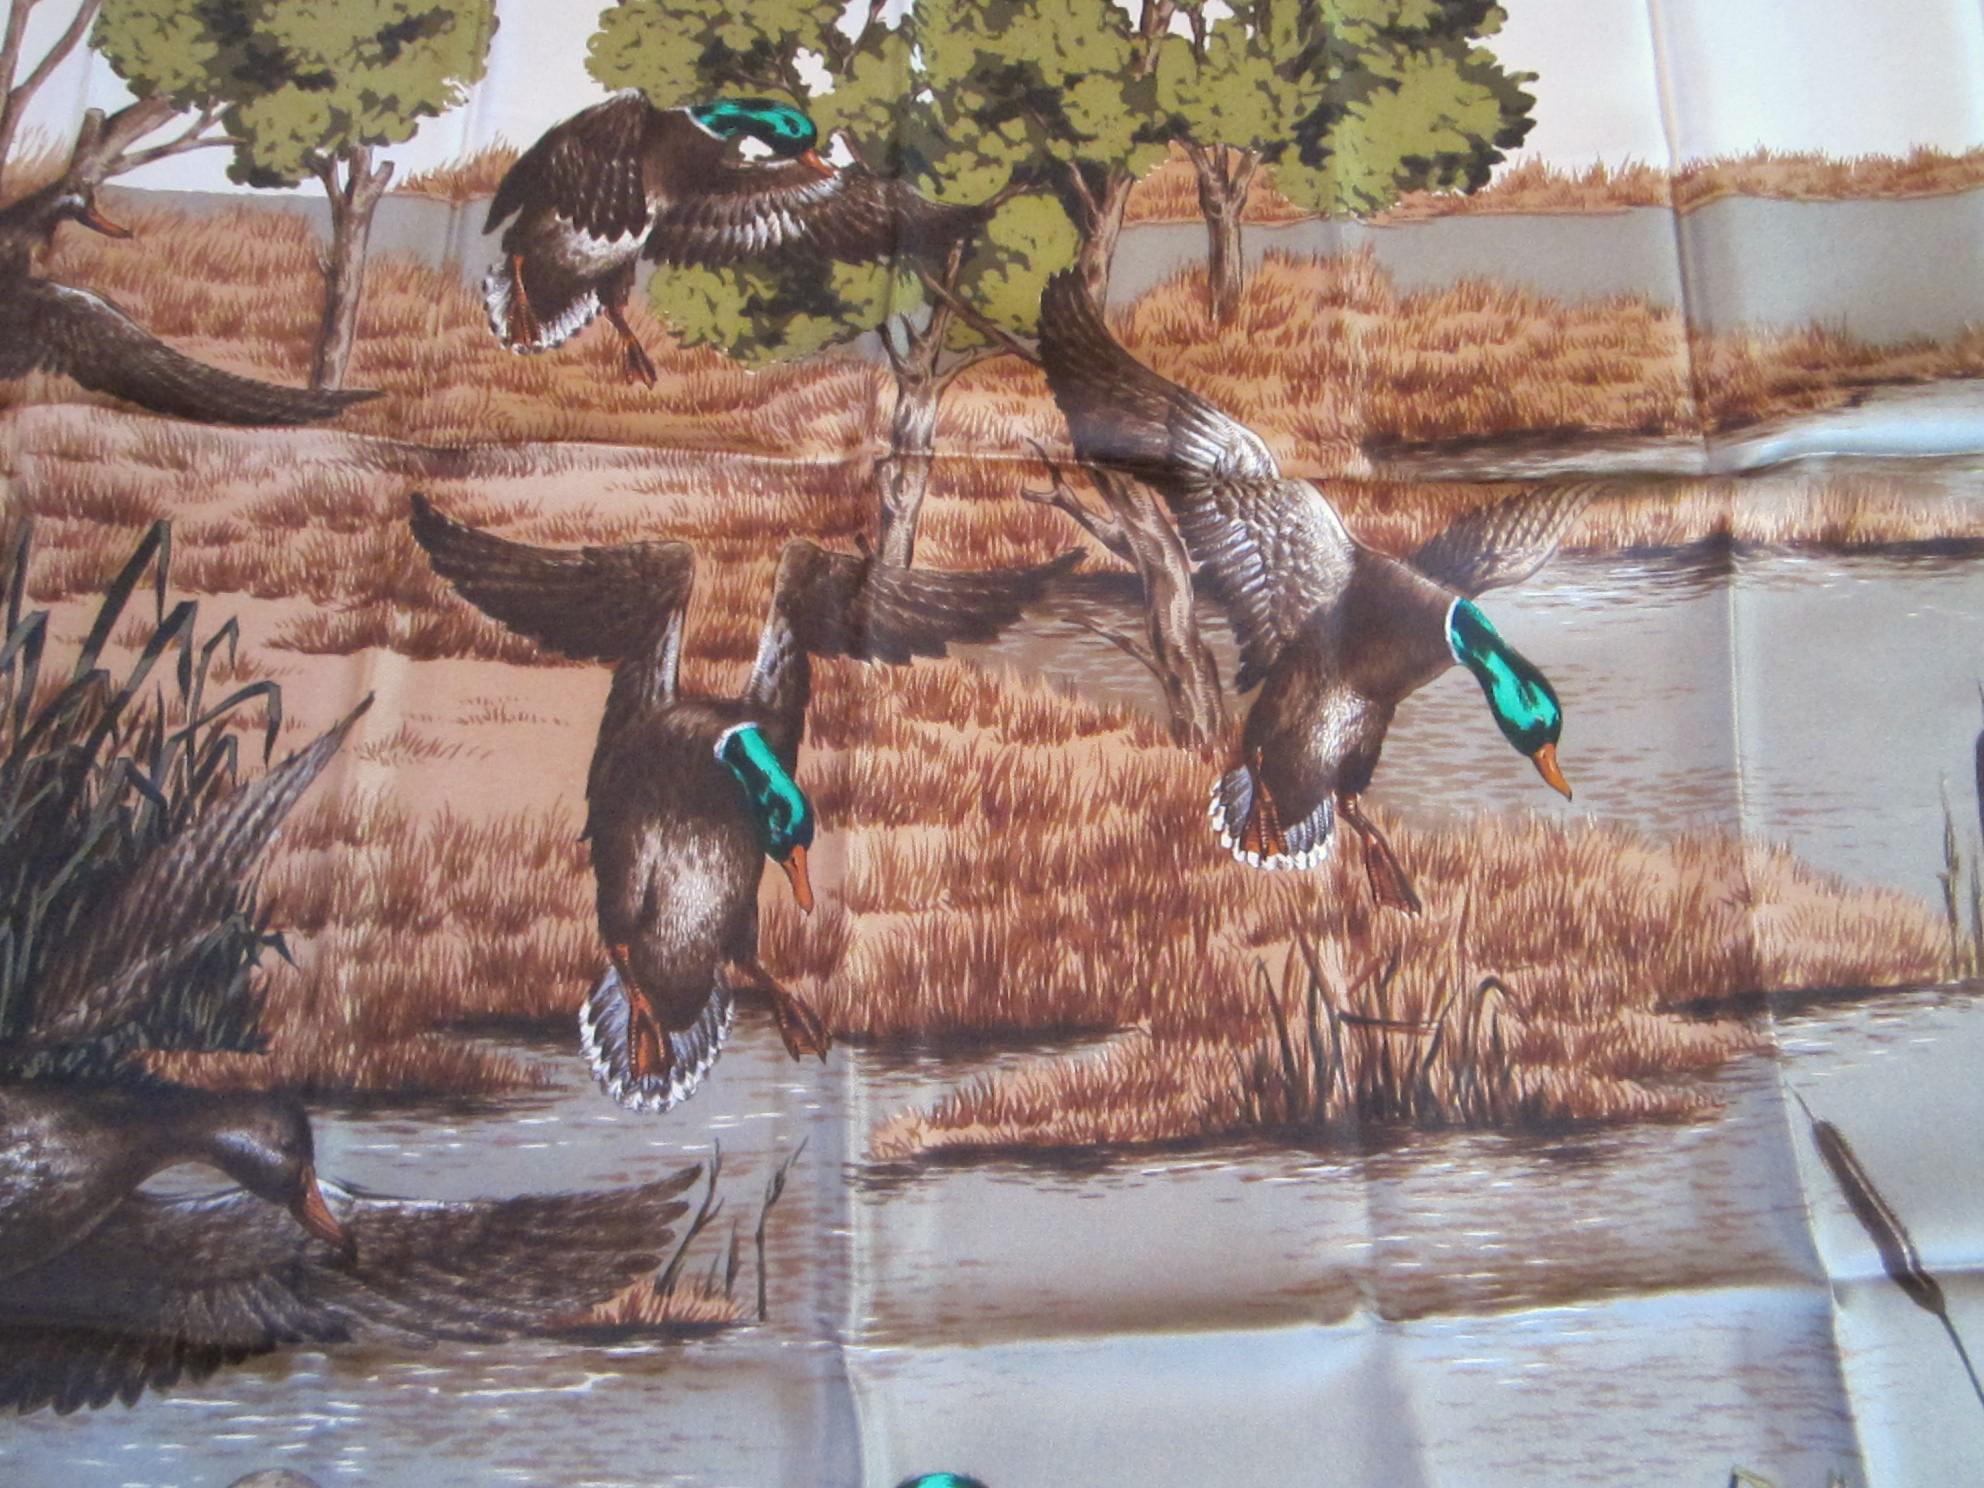 Stunning Browns and greens in this New, never worn Gucci scarf from the 1990s. Duck and Lake scene. 100% Silk. Still folded up the way they came from the store.  Please be sure to check our storefront for more Hermes, Gucci, and Escada scarves of